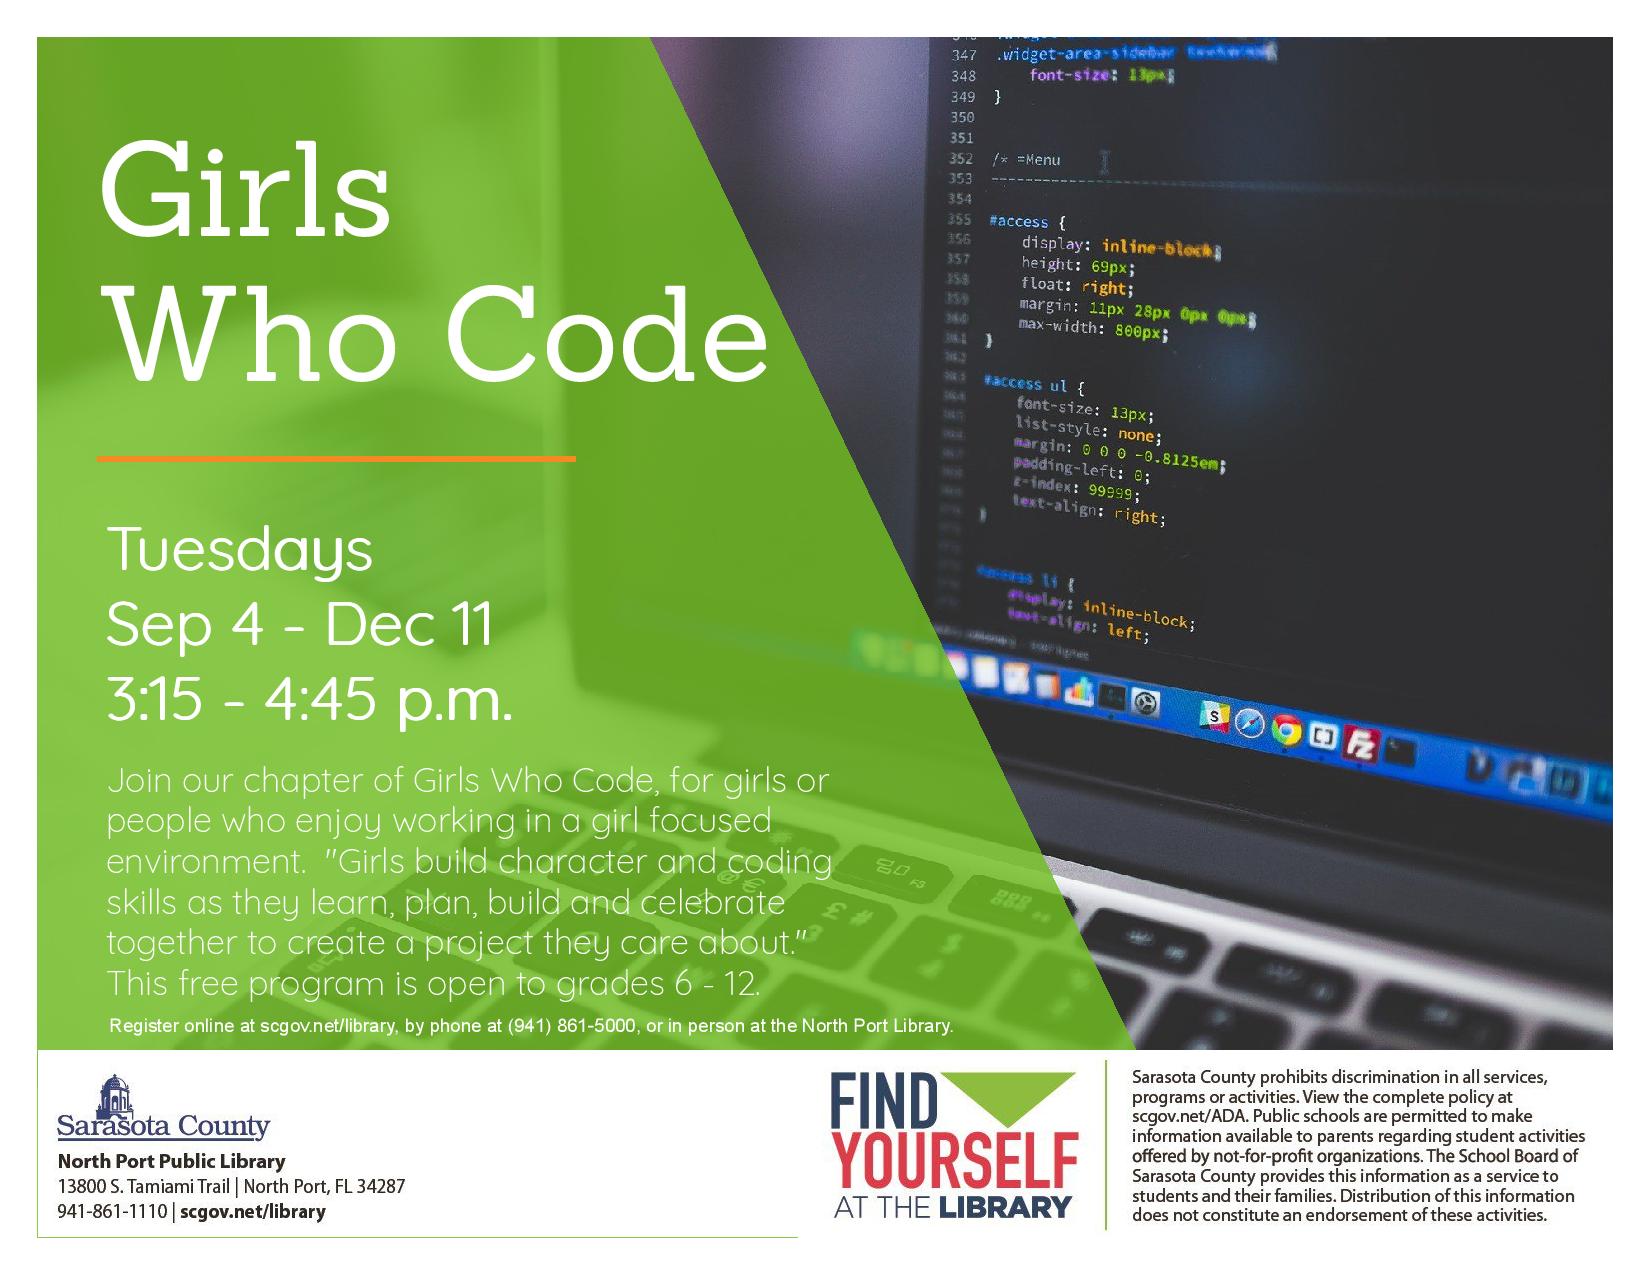 Girls Who Code open to grades 6 through 12.  Free program available online at scgov.net/library, by phone at (941) 861-5000, or in person at the North Port Library.  Empowering girls, teaching coding and leadership.